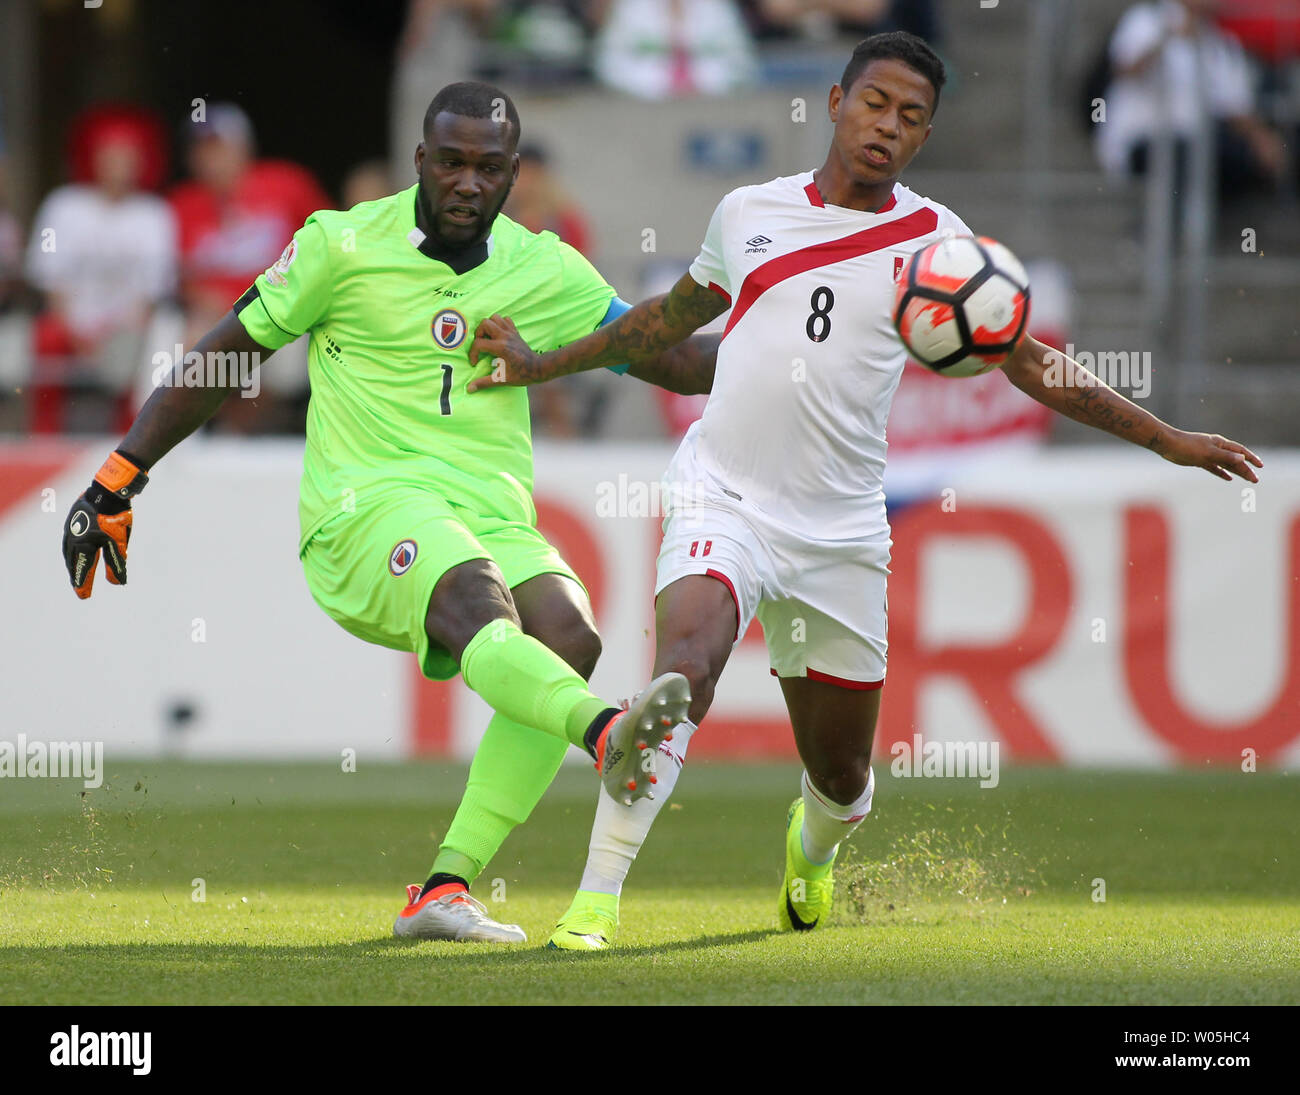 Haiti goalie Johny Placide (1) kicks the ball away from Peru's Andy Polo  (8) in a 2016 Copa America Centenario soccer match at CenturyLink Field in  Seattle, Washington on June 4, 2016.